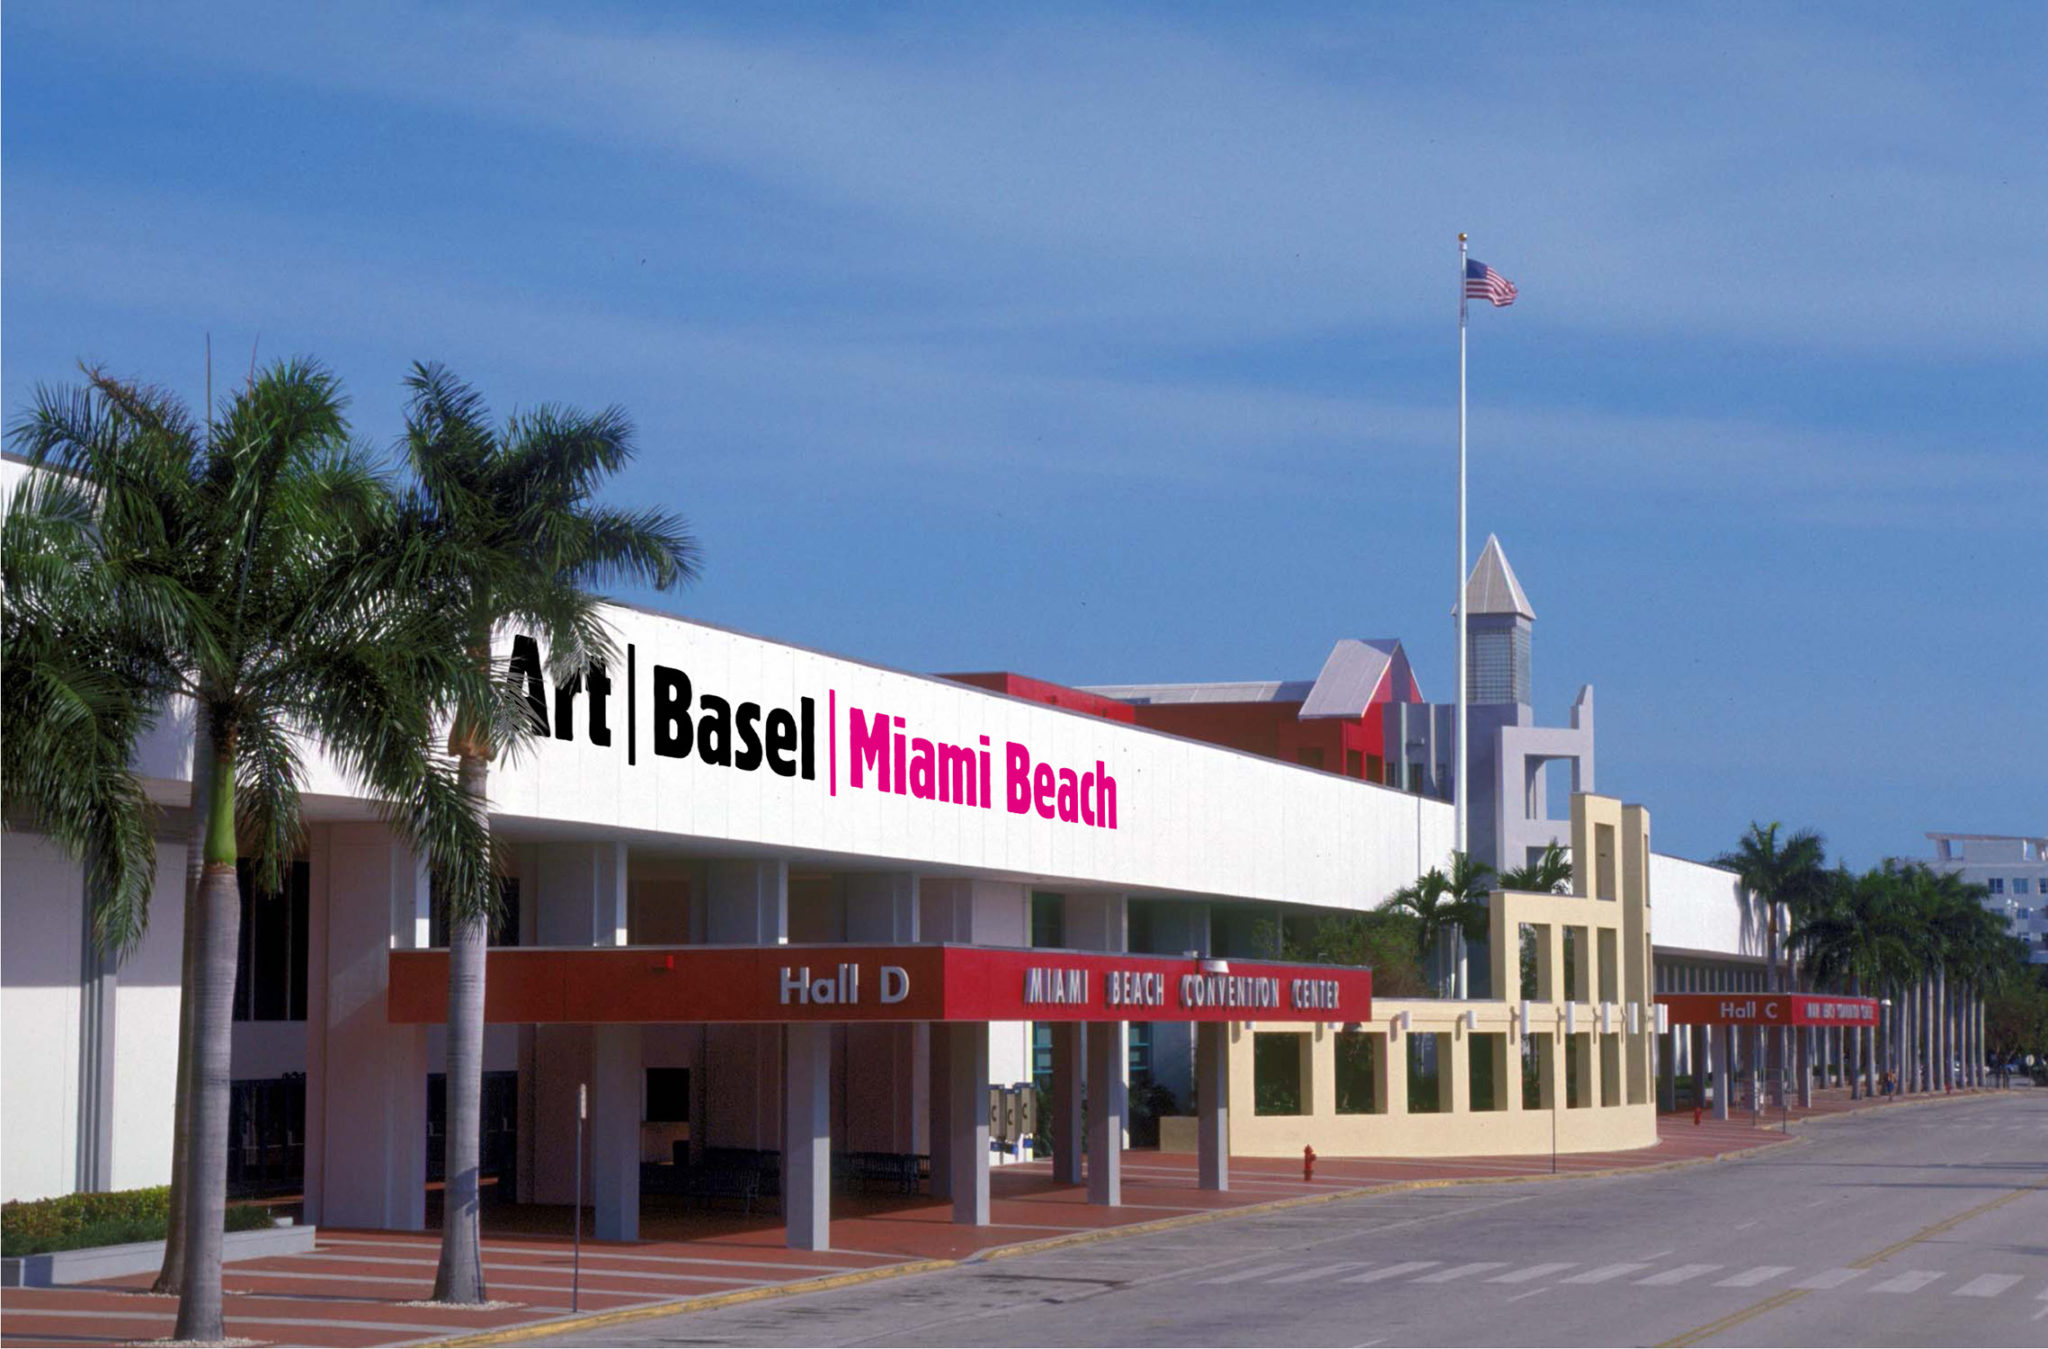 Art Basel Extends Fair for 5 More Years in Miami Beach